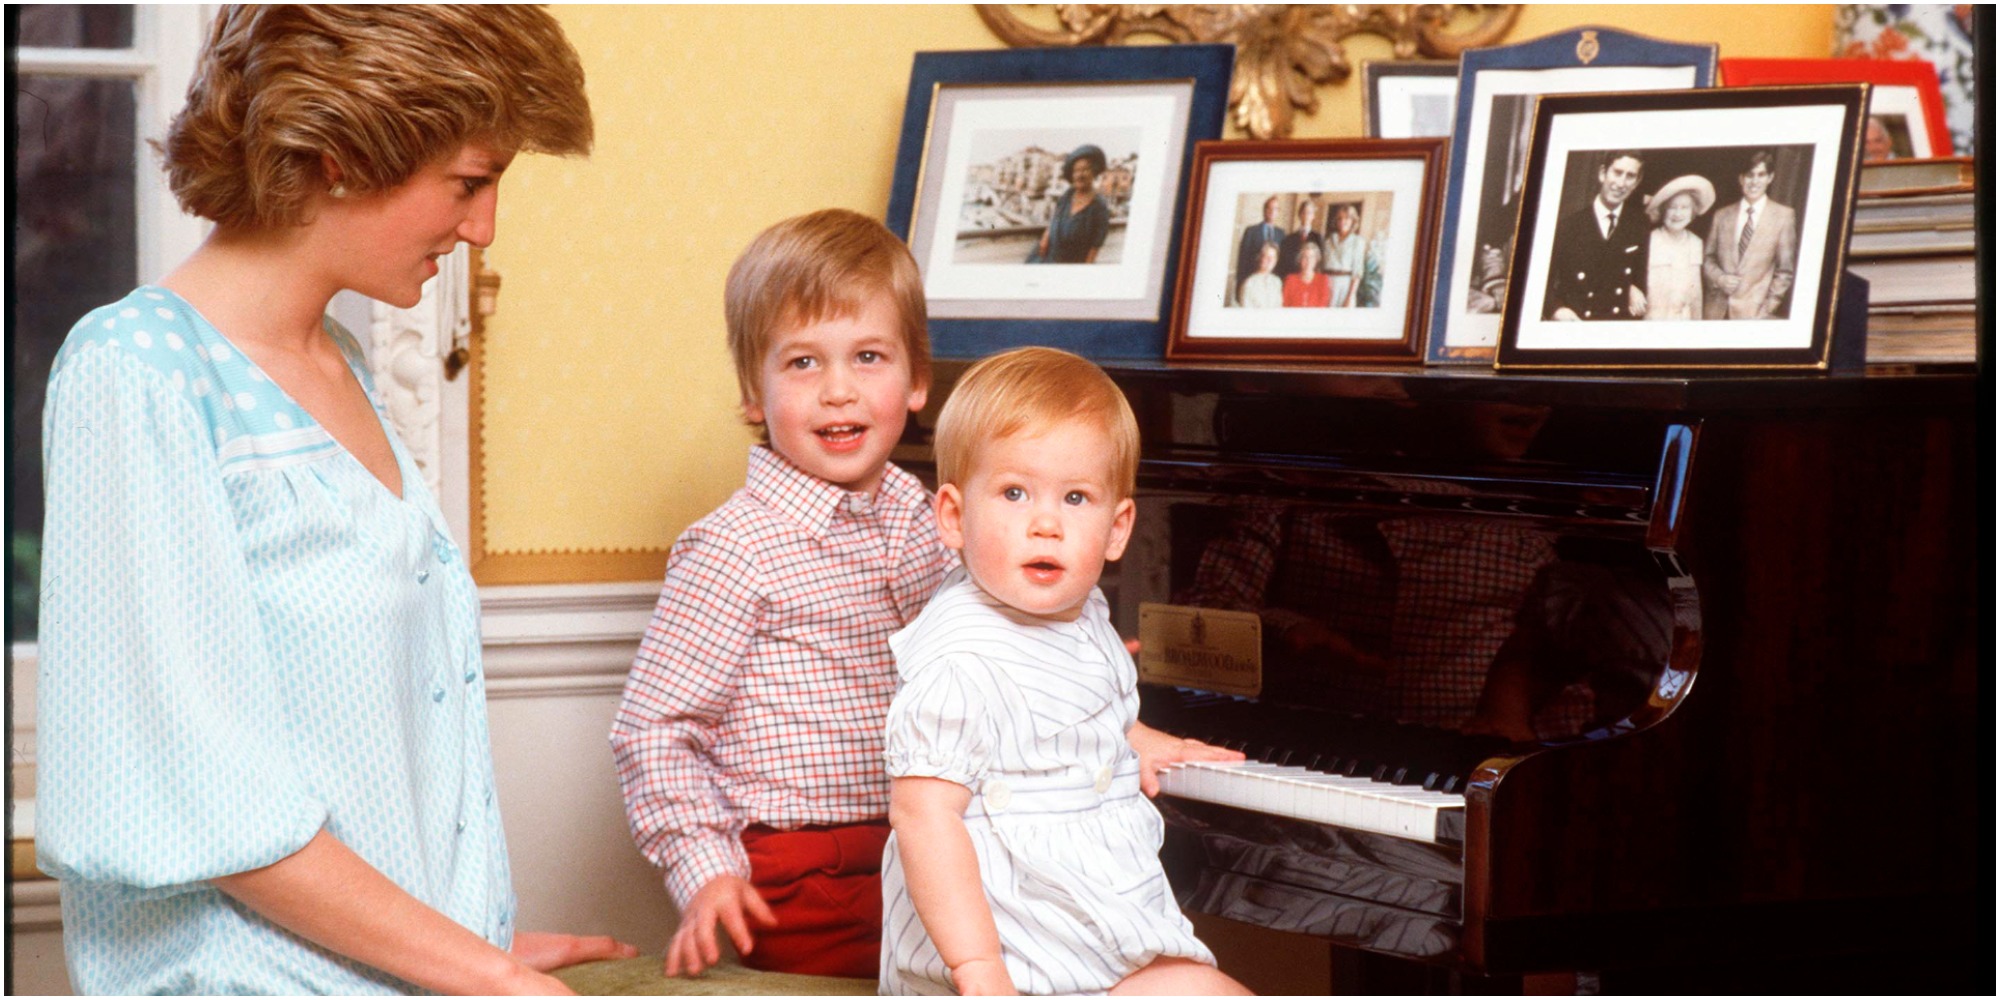 Princess Diana. Prince William and Prince Harry at home in Kensington Palace.